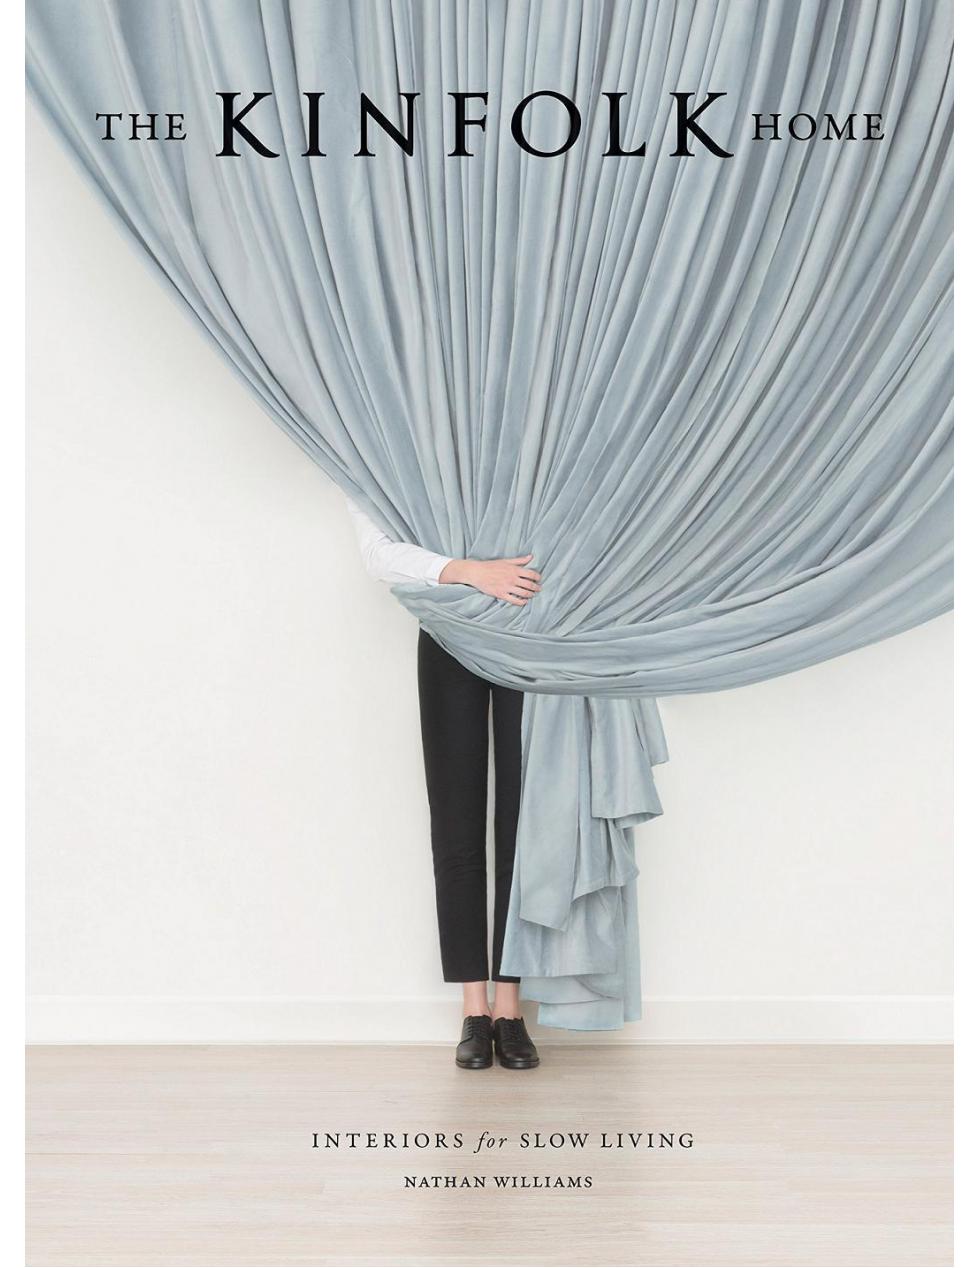 Book: THE KINFOLK HOME - Interiors For Slow Living